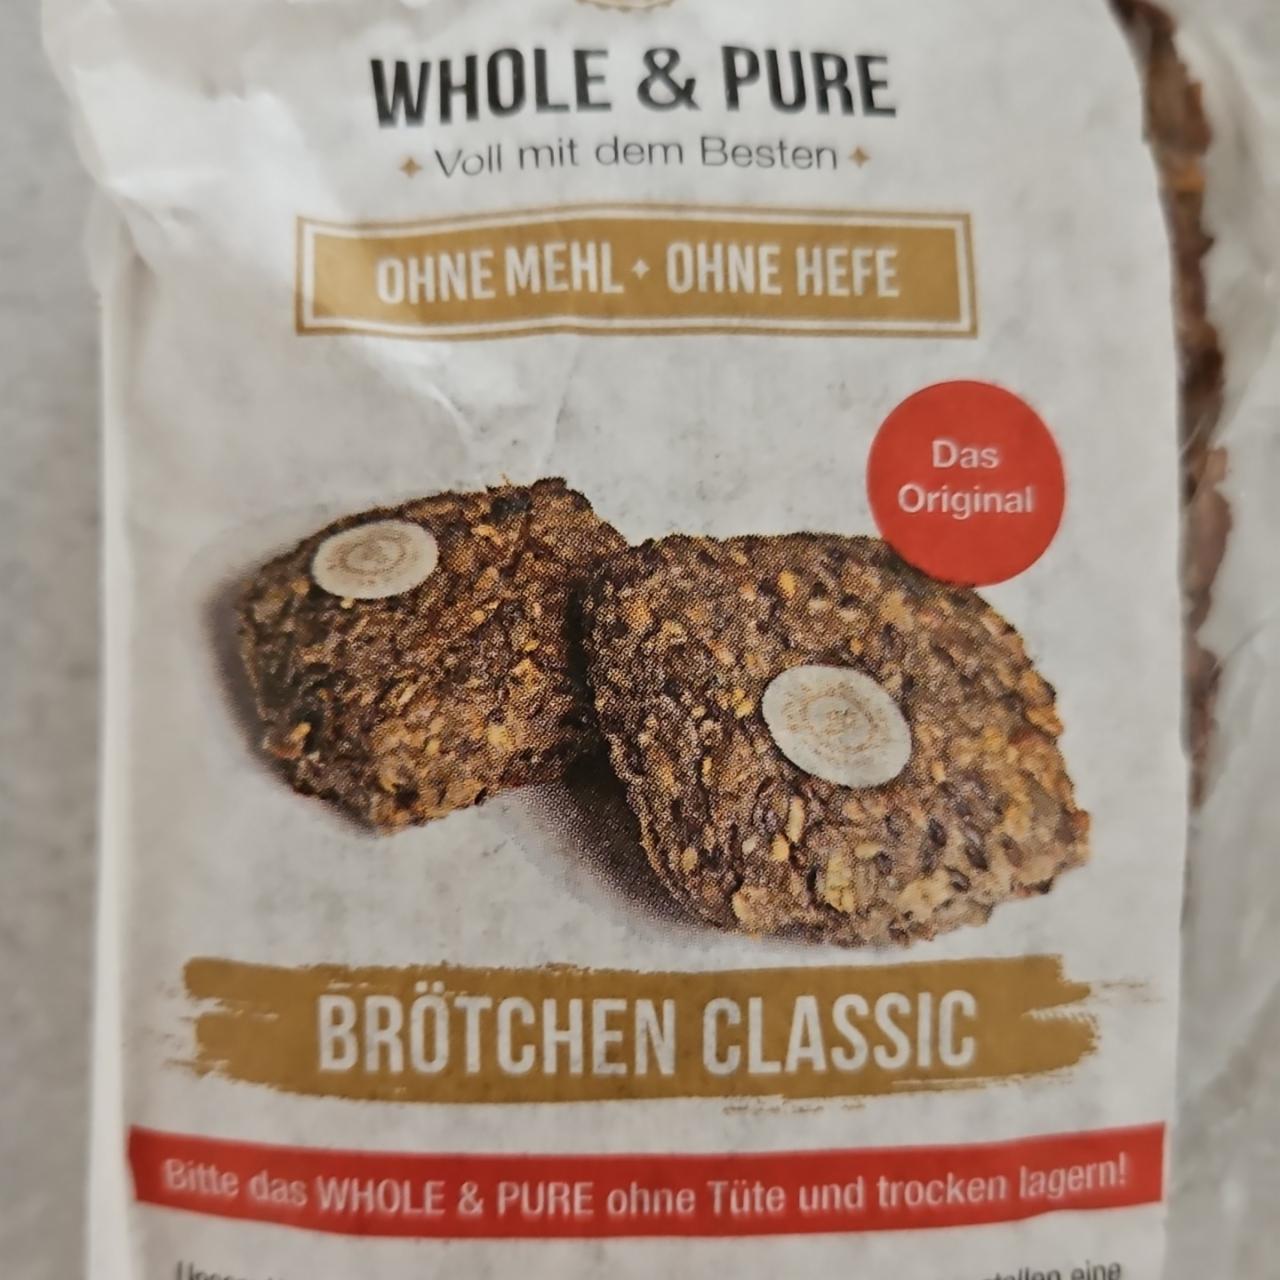 Fotografie - Brötchen classic Ohne mehl + Ohne hefe Whole & Pure